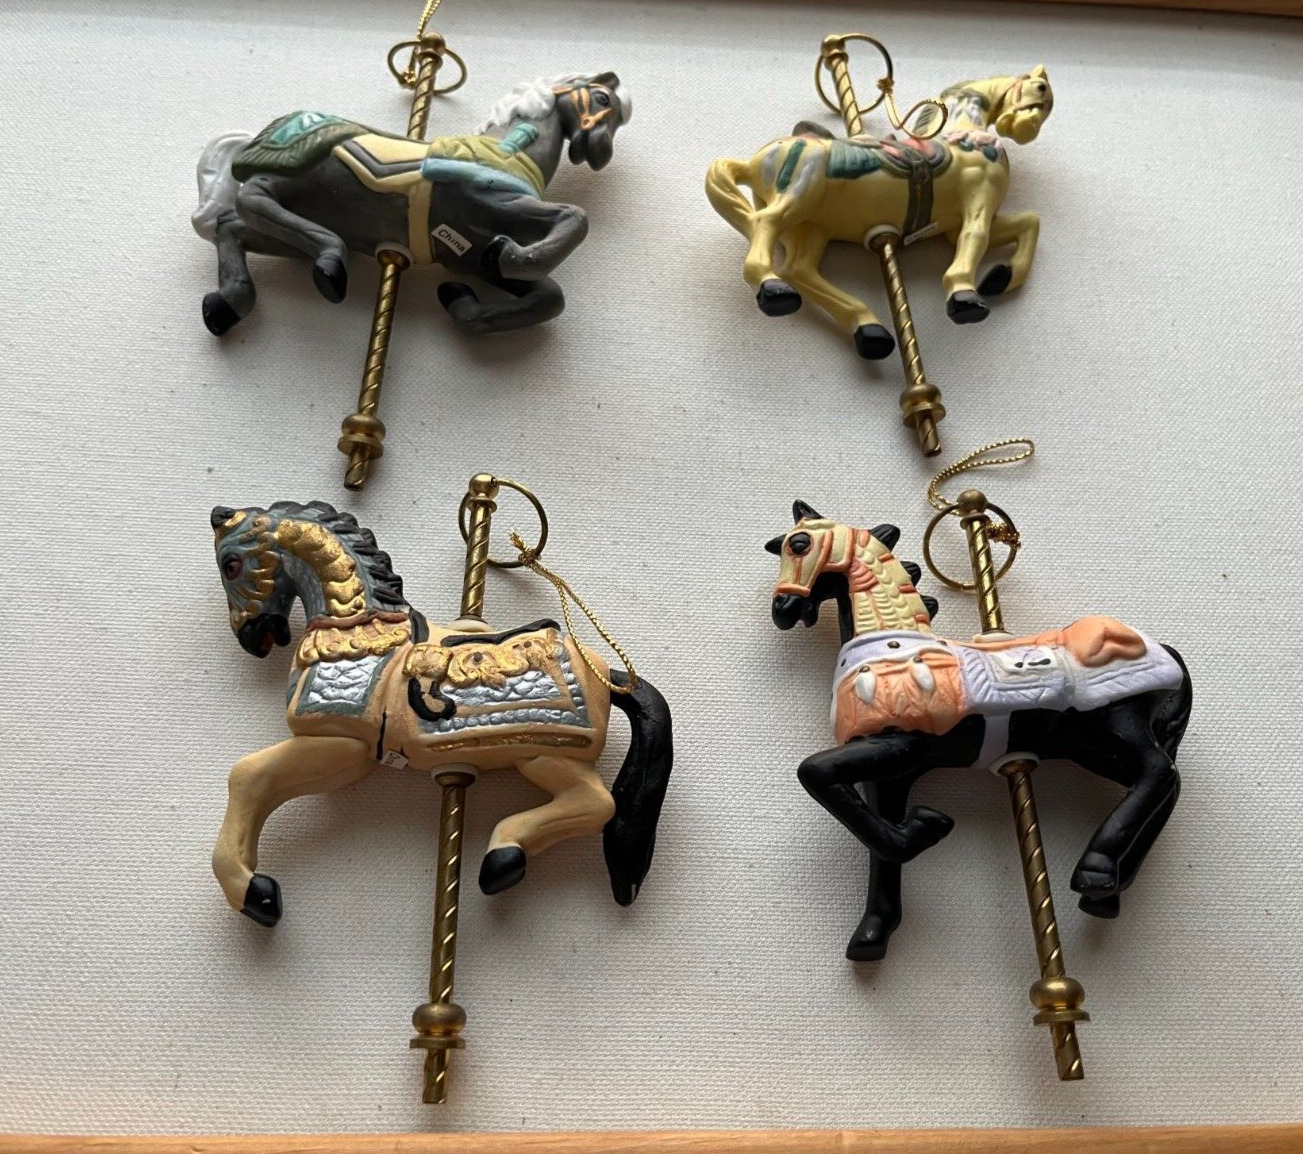 Vintage Porcelain Carousel horses on  brass poles with hangers - set of four (4)